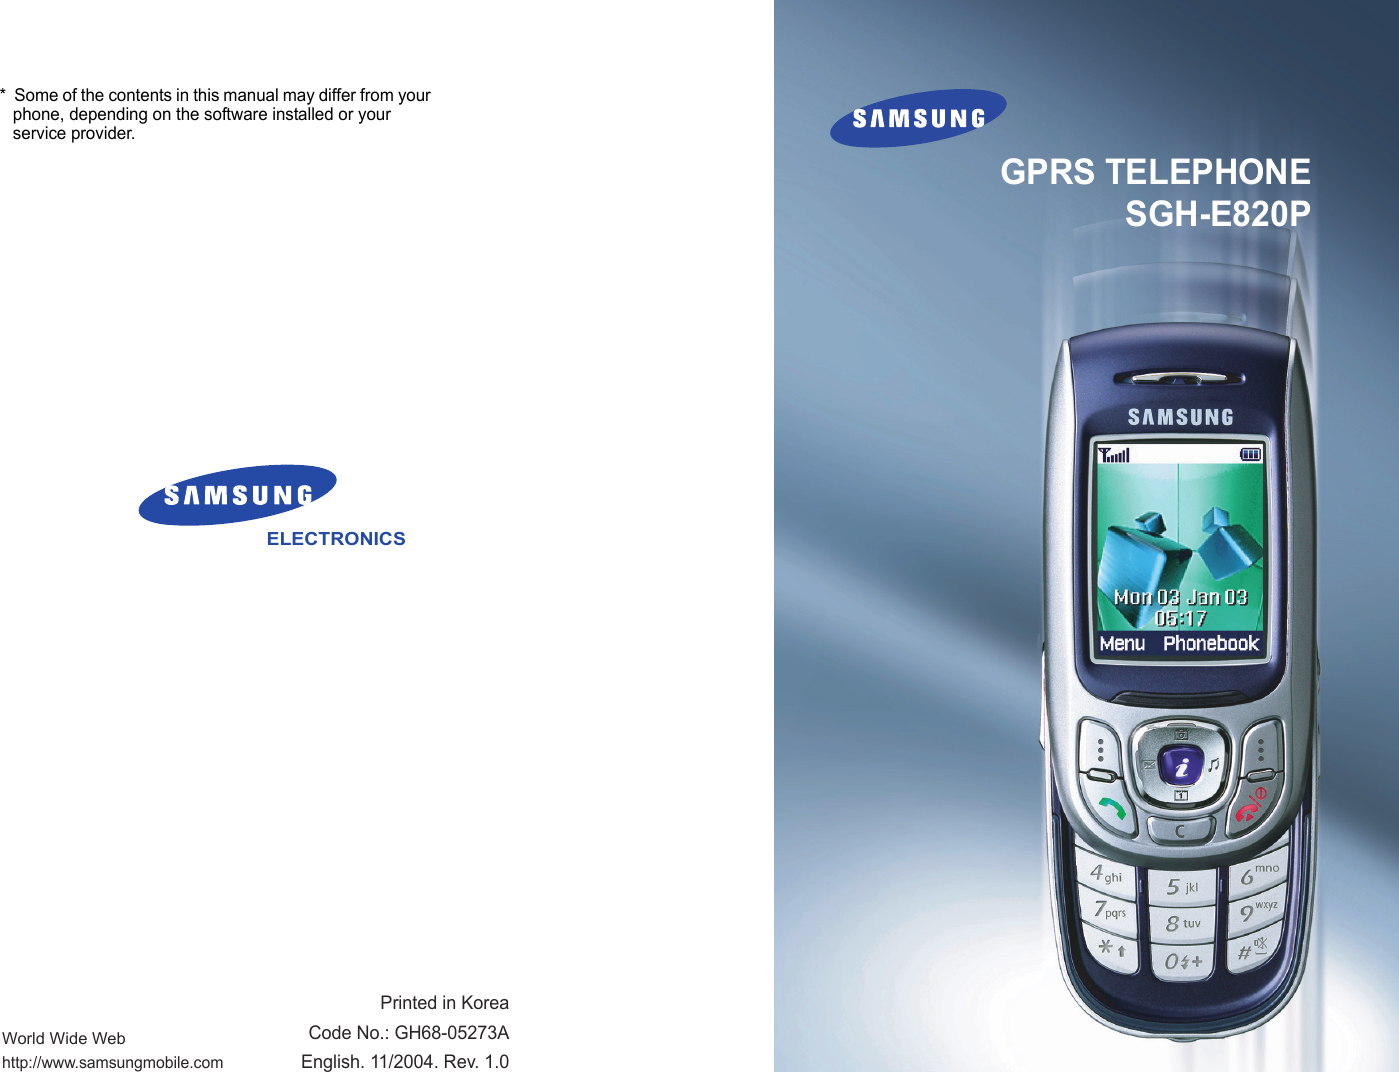 World Wide Webhttp://www.samsungmobile.comPrinted in KoreaCode No.: GH68-05273AEnglish. 11/2004. Rev. 1.0ELECTRONICS*  Some of the contents in this manual may differ from your phone, depending on the software installed or your service provider.GPRS TELEPHONESGH-E820P